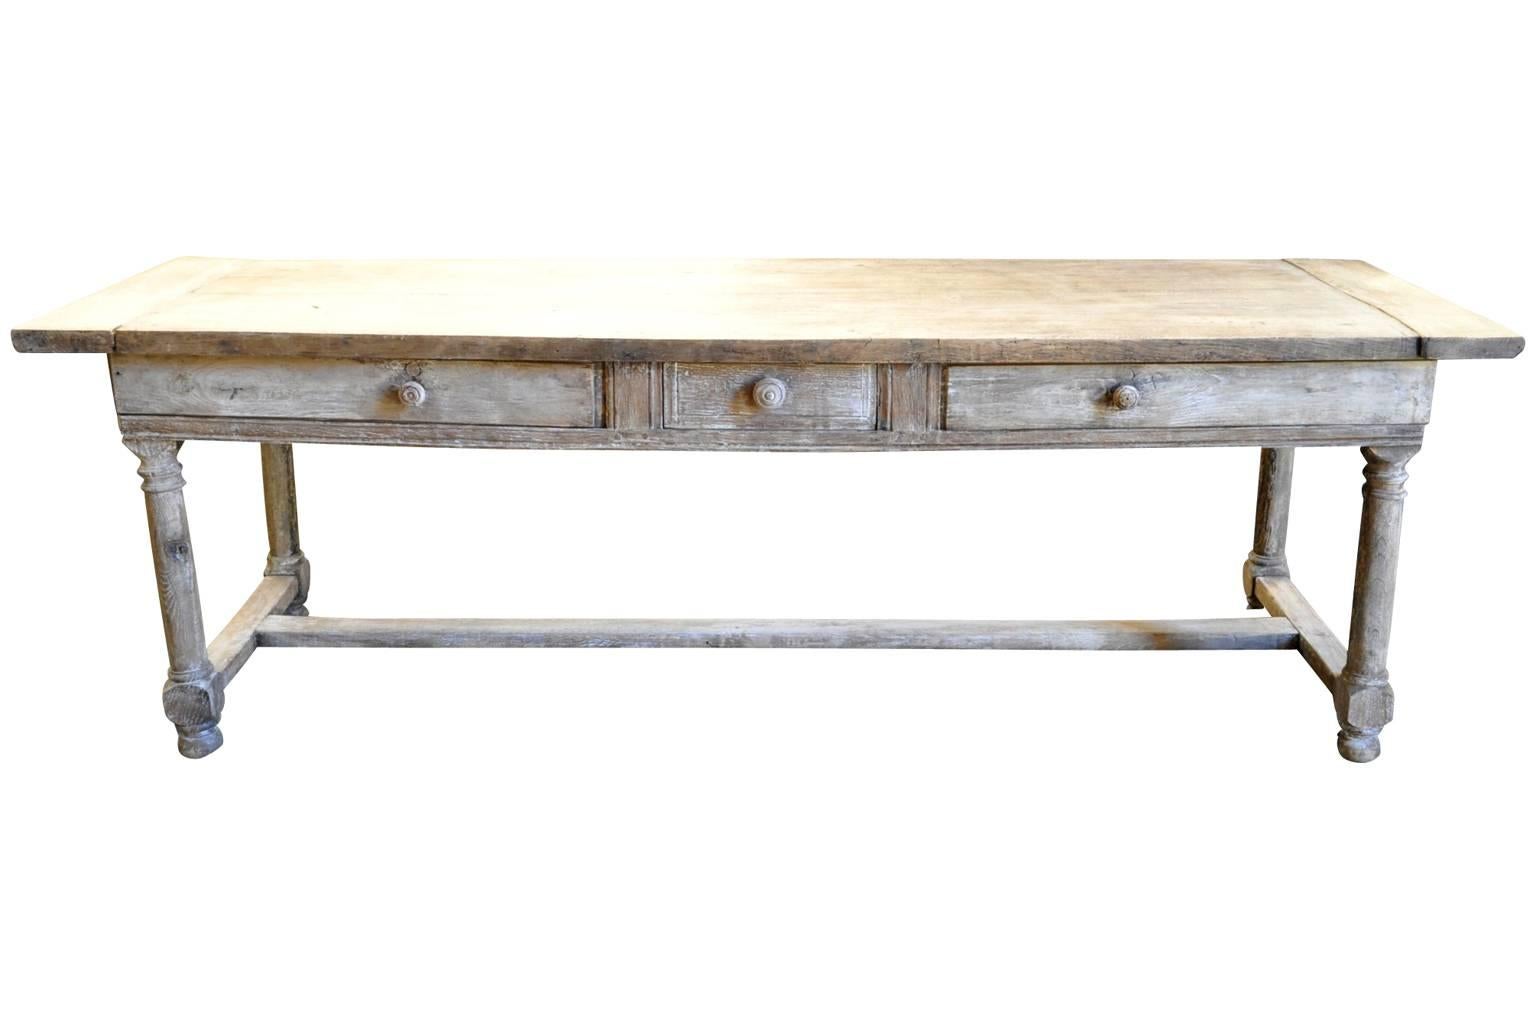 A very handsome mid-19th century console table from the Provence region of France. Wonderfully crafted from washed or bleached oak with two sliding panels and a drawer.